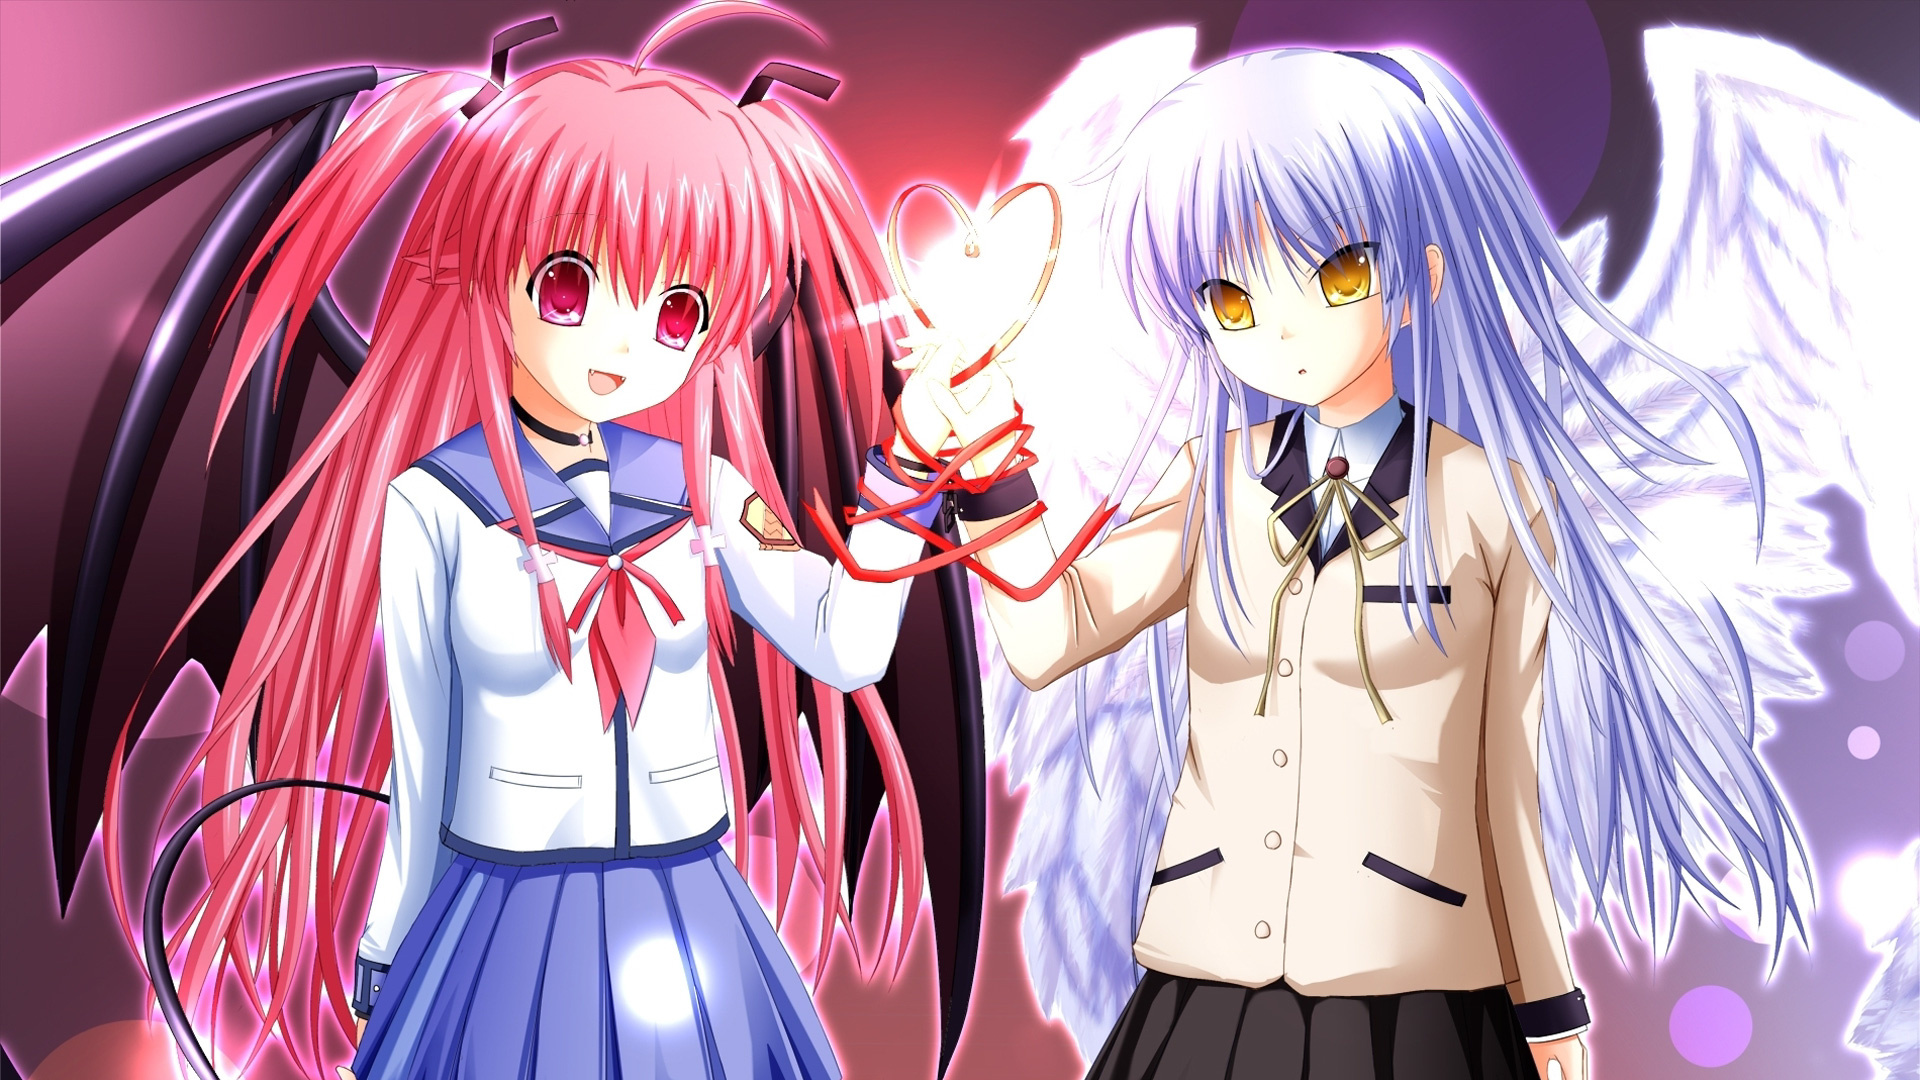 Angel Beats! (Anime): Mysterious shadow-like entities, Limbo for people who have experienced trauma or hardships in life. 1920x1080 Full HD Wallpaper.